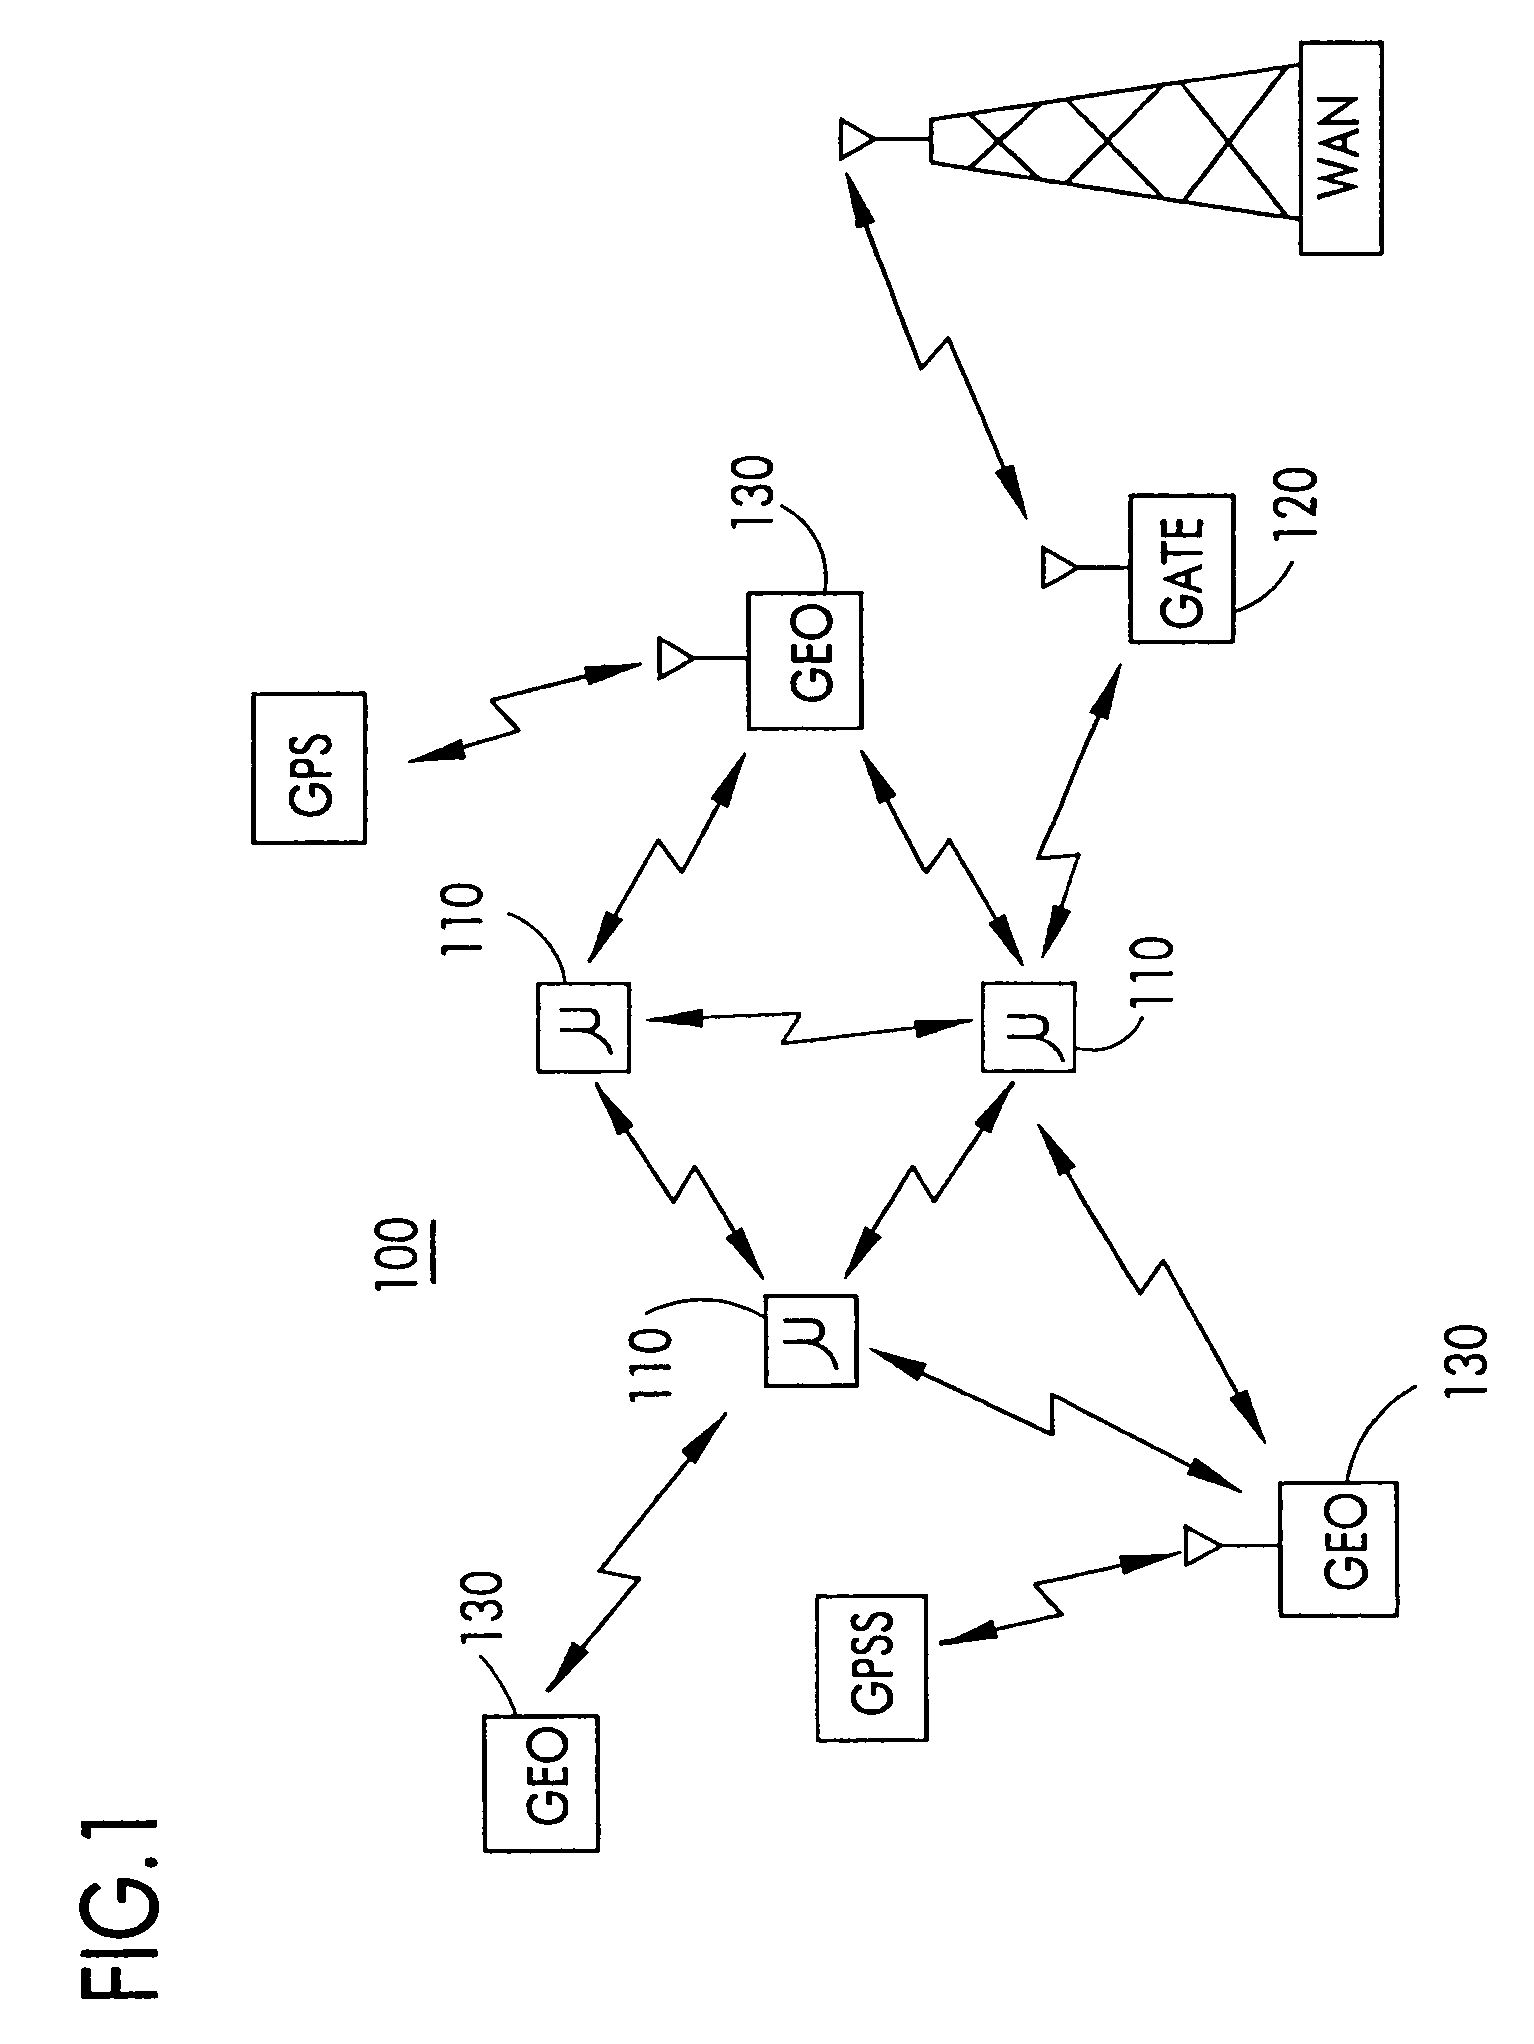 Node-to node messaging transceiver network with dynamic routing and configuring